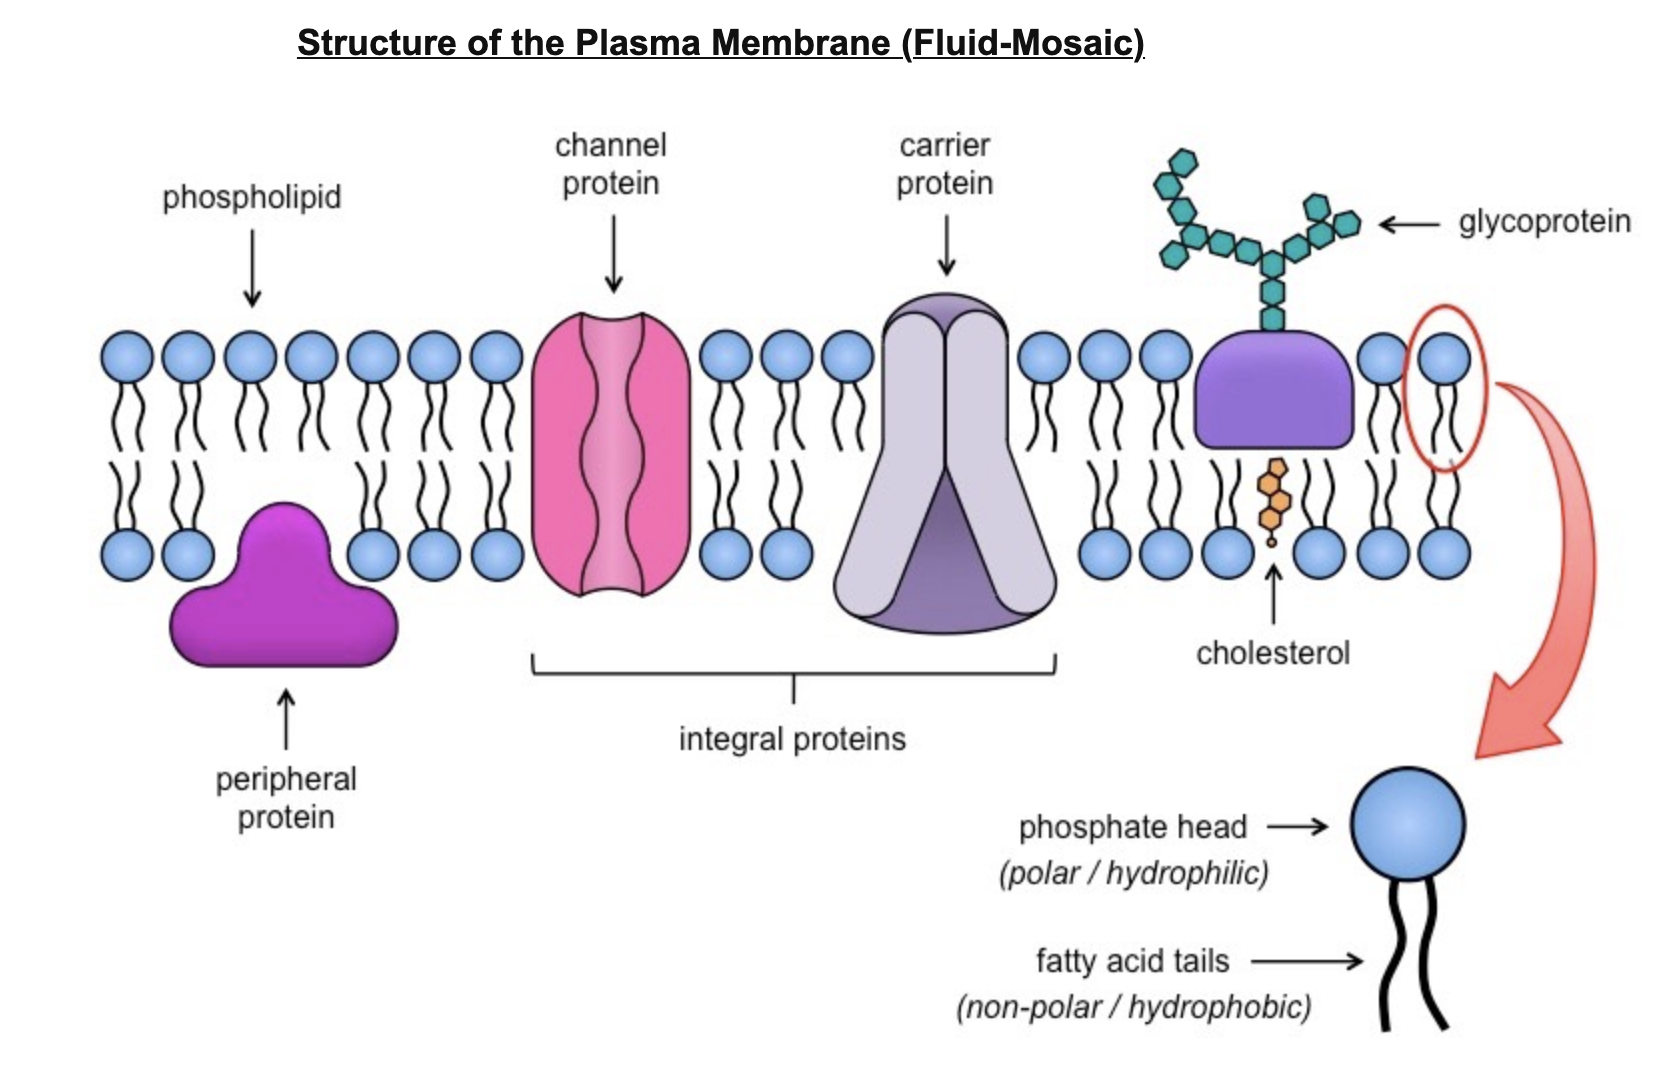 <p><span>Cell membranes are represented according to a fluid-mosaic model, due to the fact that they are:</span></p><ul><li><p><em><span>Fluid</span></em><span> – the phospholipid bilayer is viscous and individual phospholipids can move position</span></p></li><li><p><em><span>Mosaic </span></em><span>– the phospholipid bilayer is embedded with proteins, resulting in a mosaic of components</span></p></li></ul>